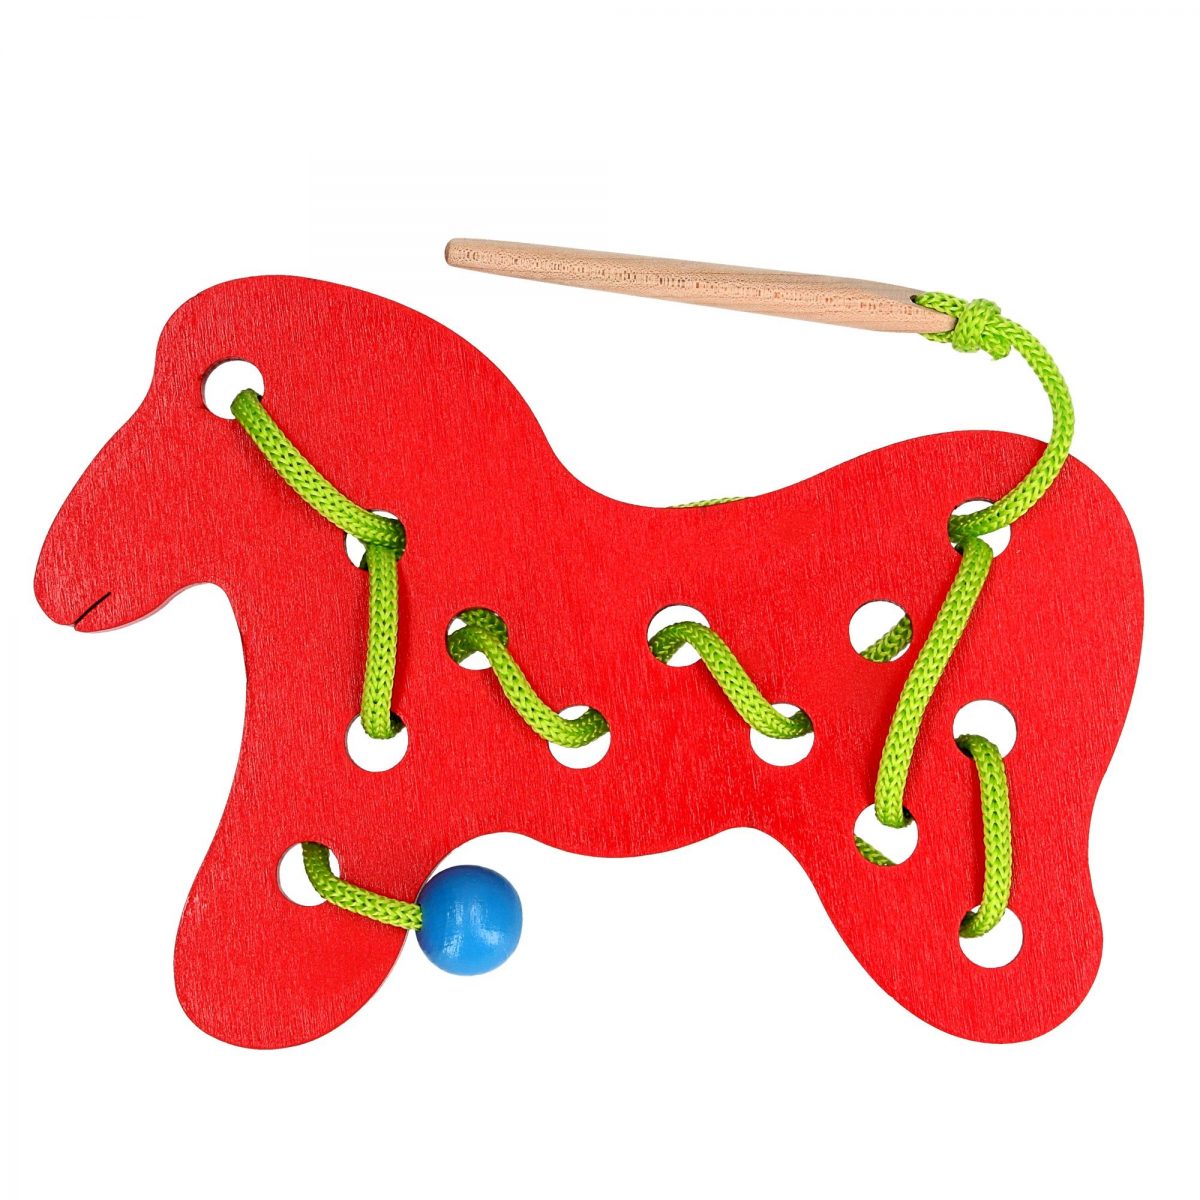 wooden horse lacing toy large size bright for babies and toddlers